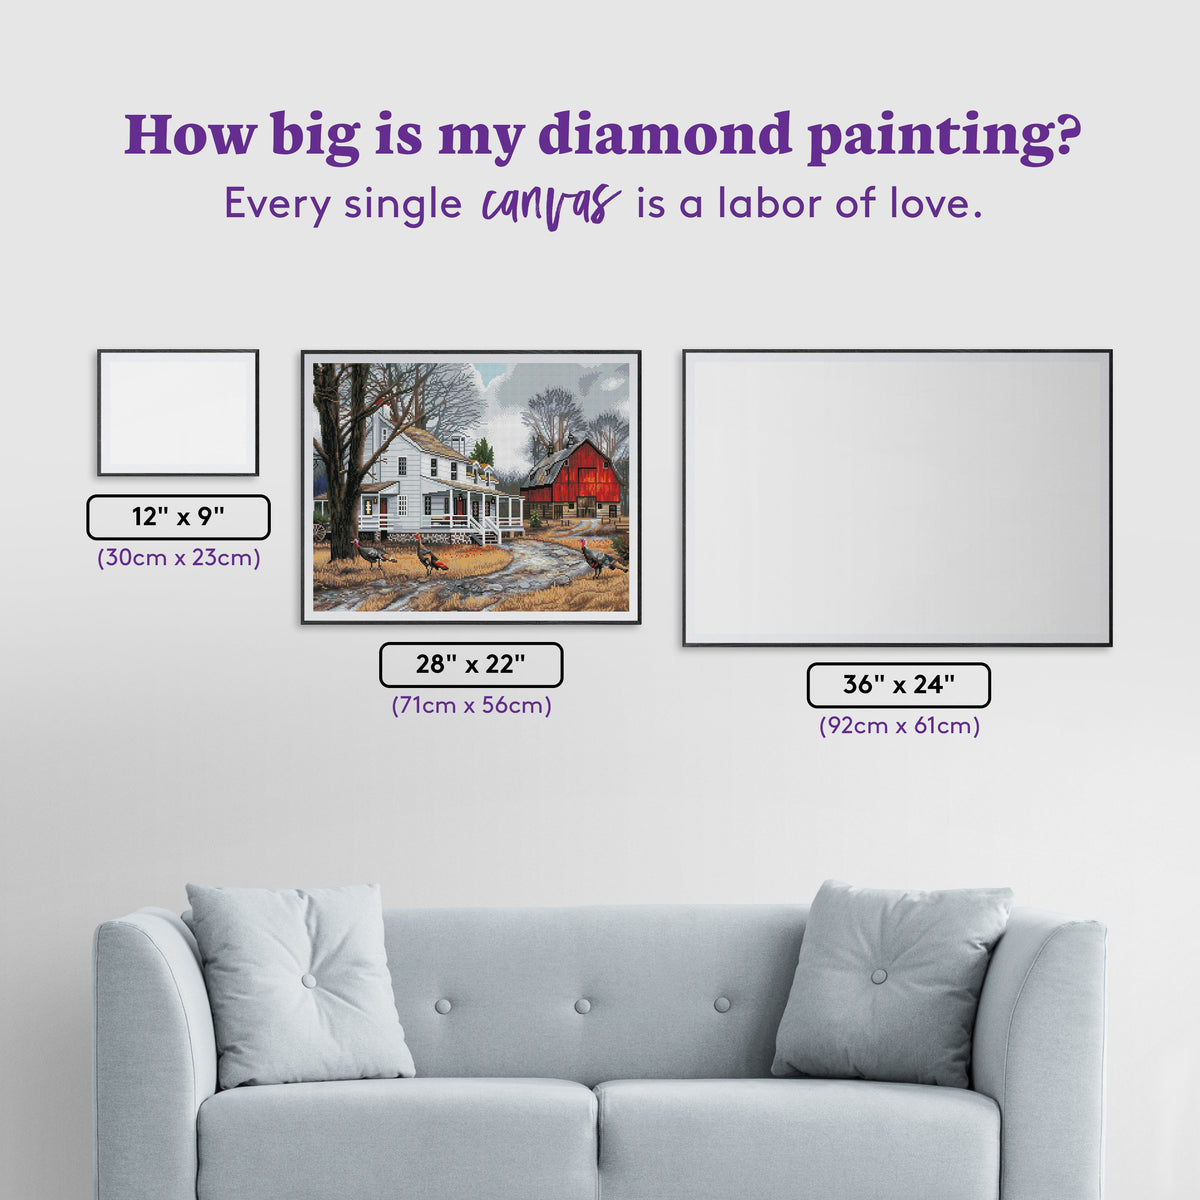 Diamond Painting The Way It Used To Be 28" x 22" (71cm x 56cm) / Round With 36 Colors Including 2 ABs / 49,896